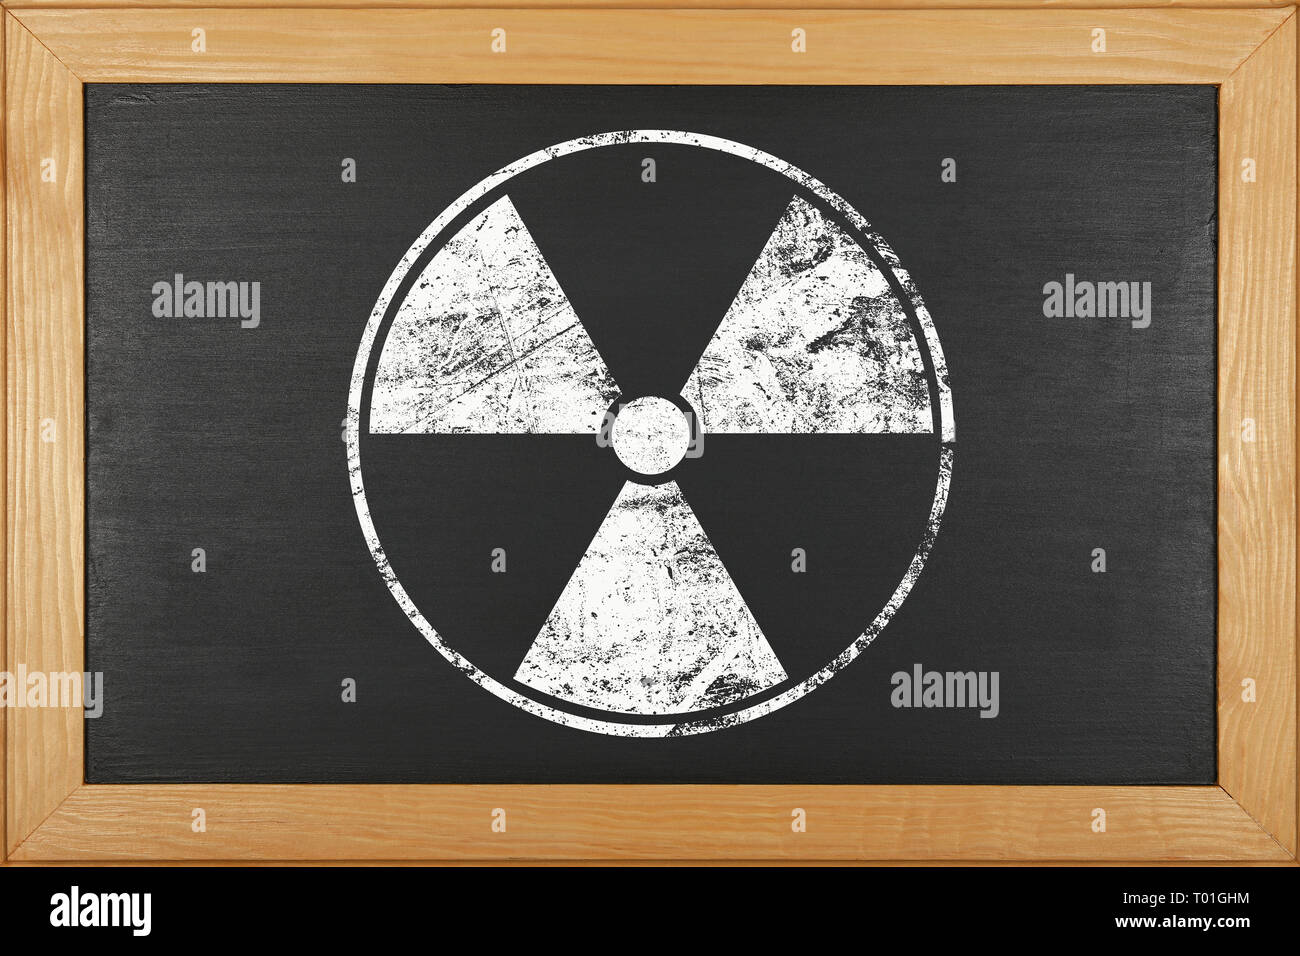 White chalk radioactive hazard warning sign over grunge black background of chalkboard with copy space Stock Photo